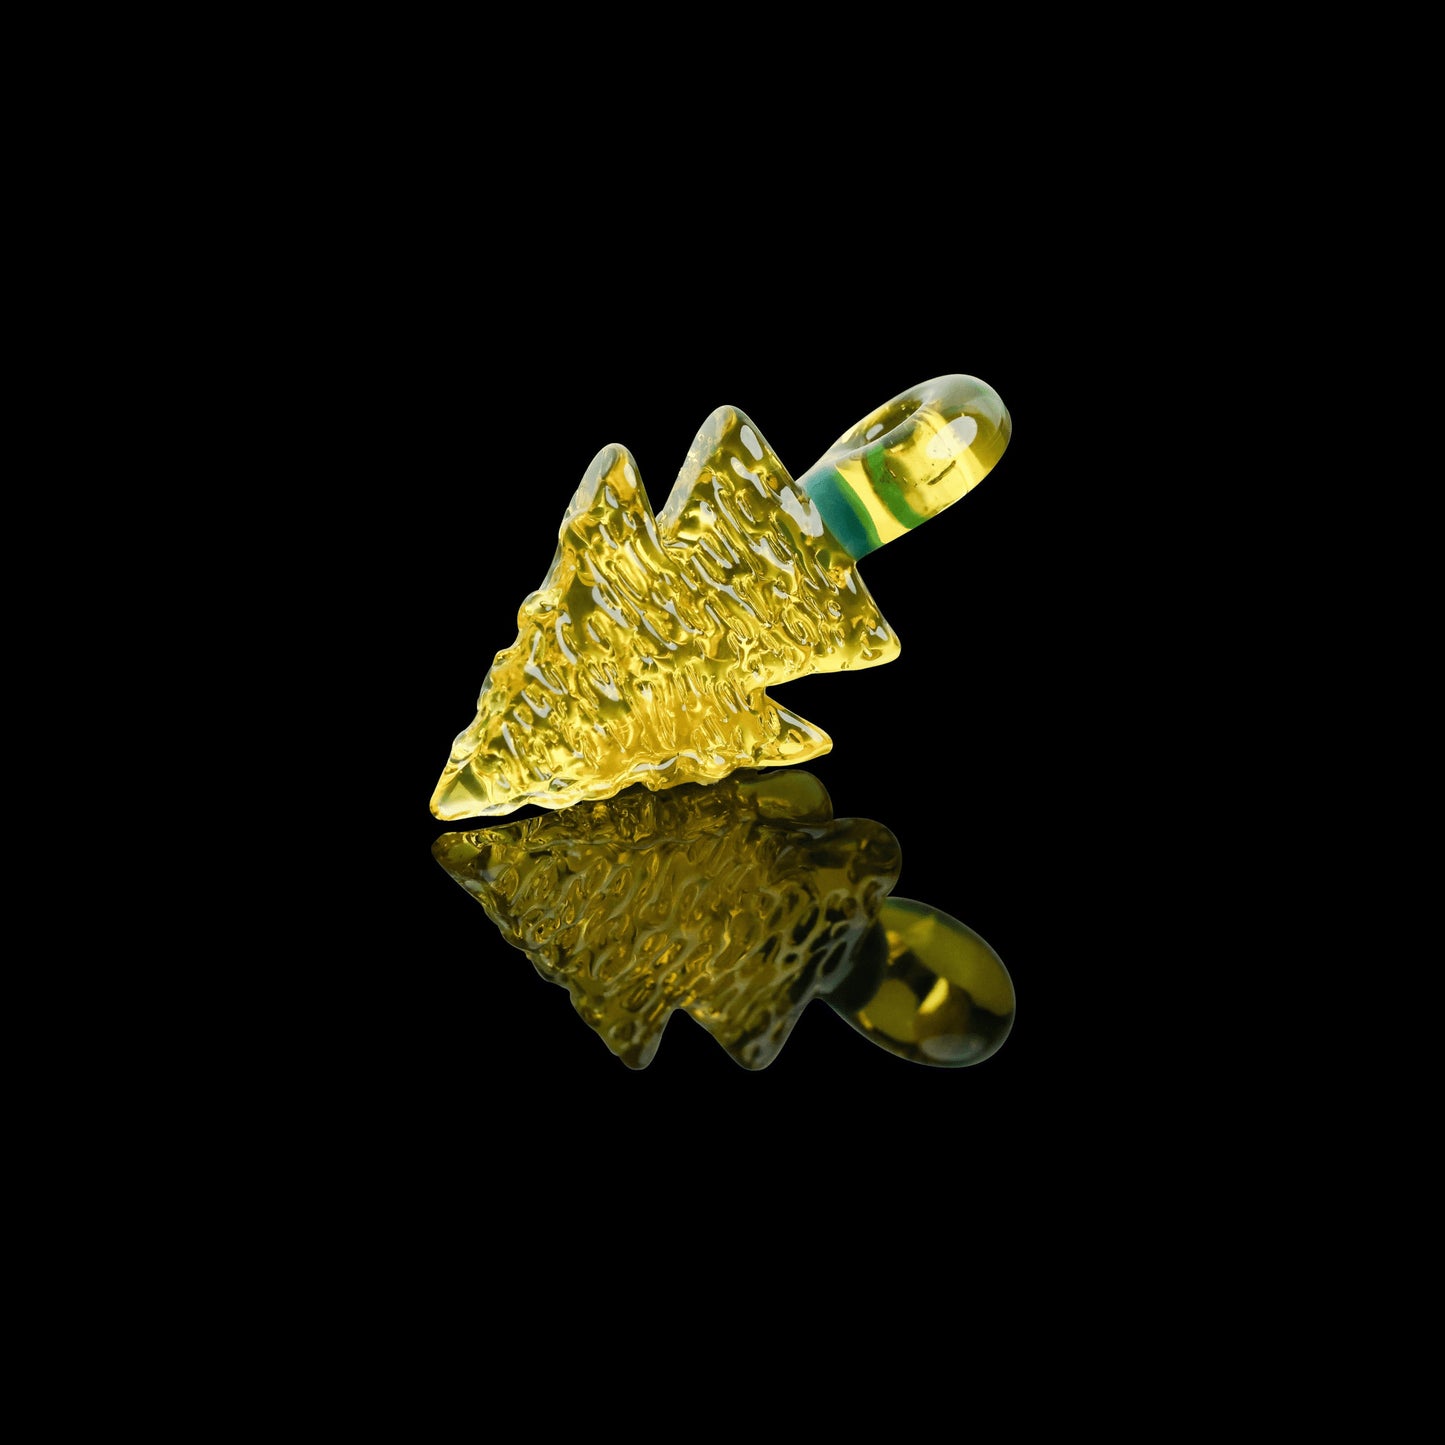 meticulously crafted glass pendant - GA Terps CFL Arrowhead Pendant by Elks That Run (2022 Drop)